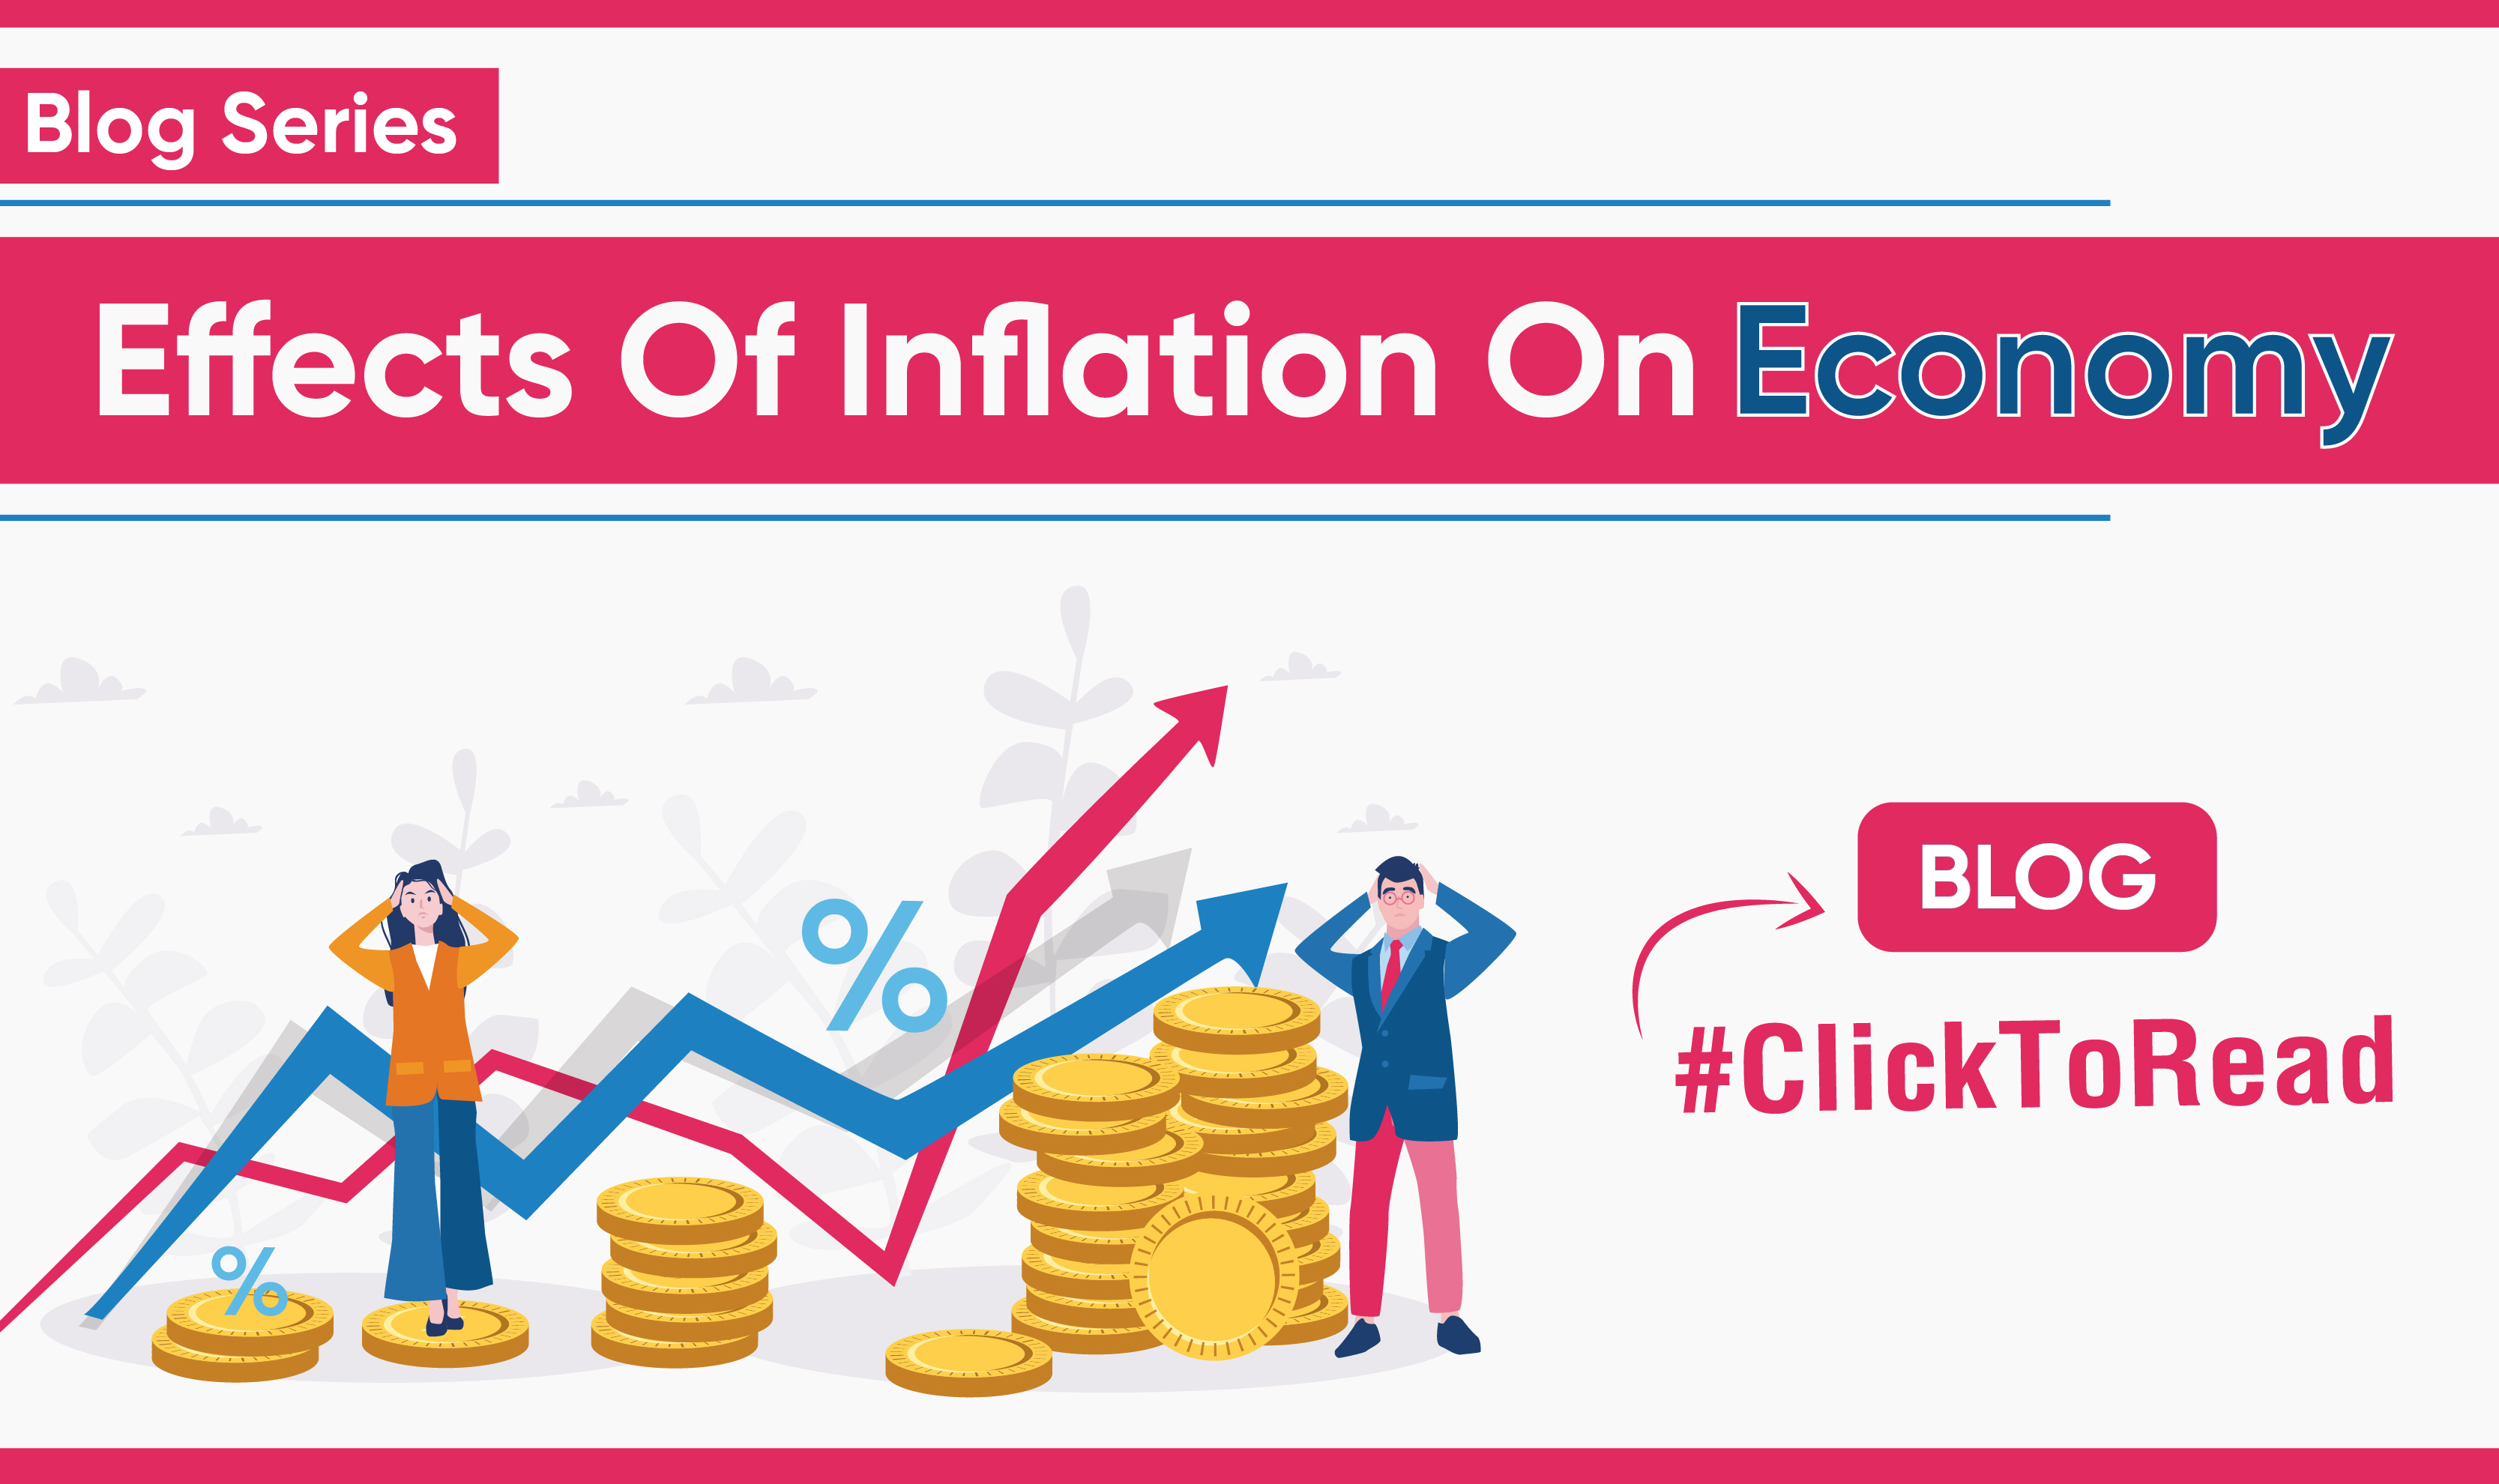 Effects of inflation on the Indian economy